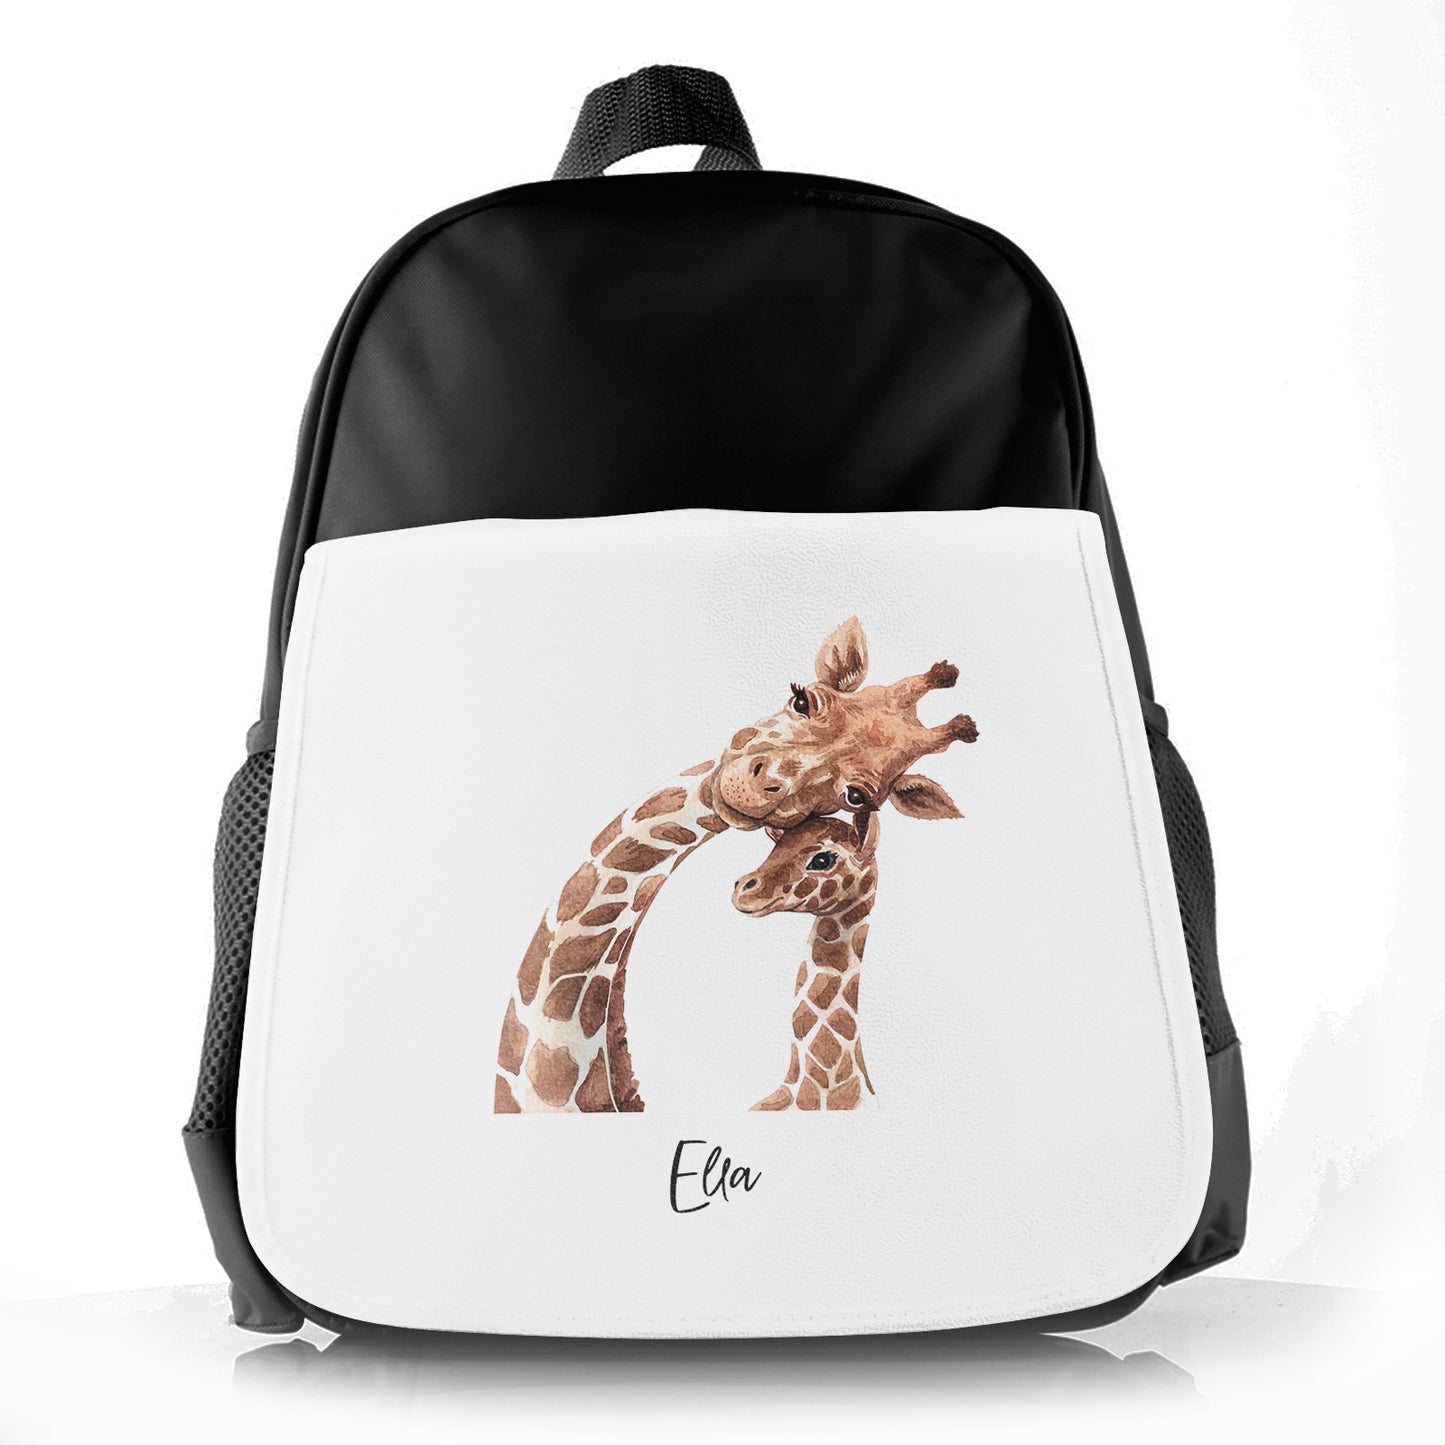 Personalised School Bag with Welcoming Text and Relaxing Mum and Baby Giraffes